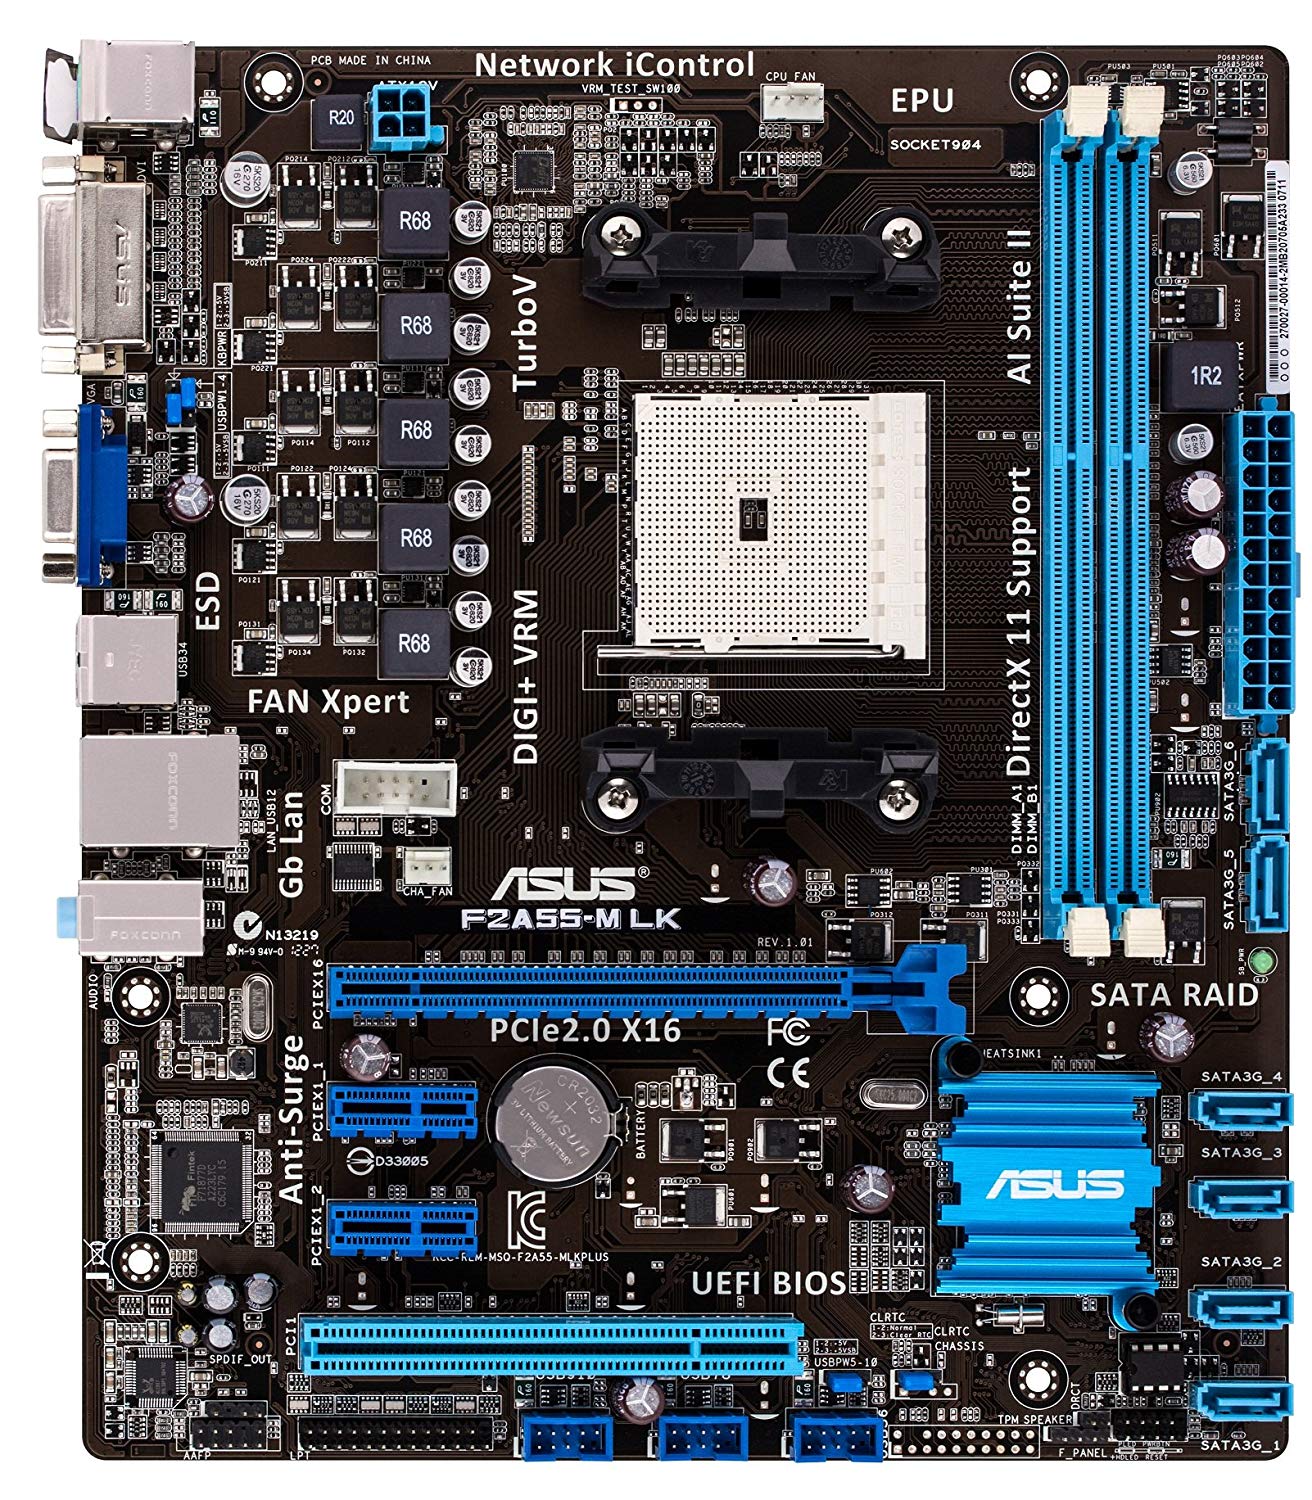 ASUS F2A55-M LK DDR3 2400 Motherboards